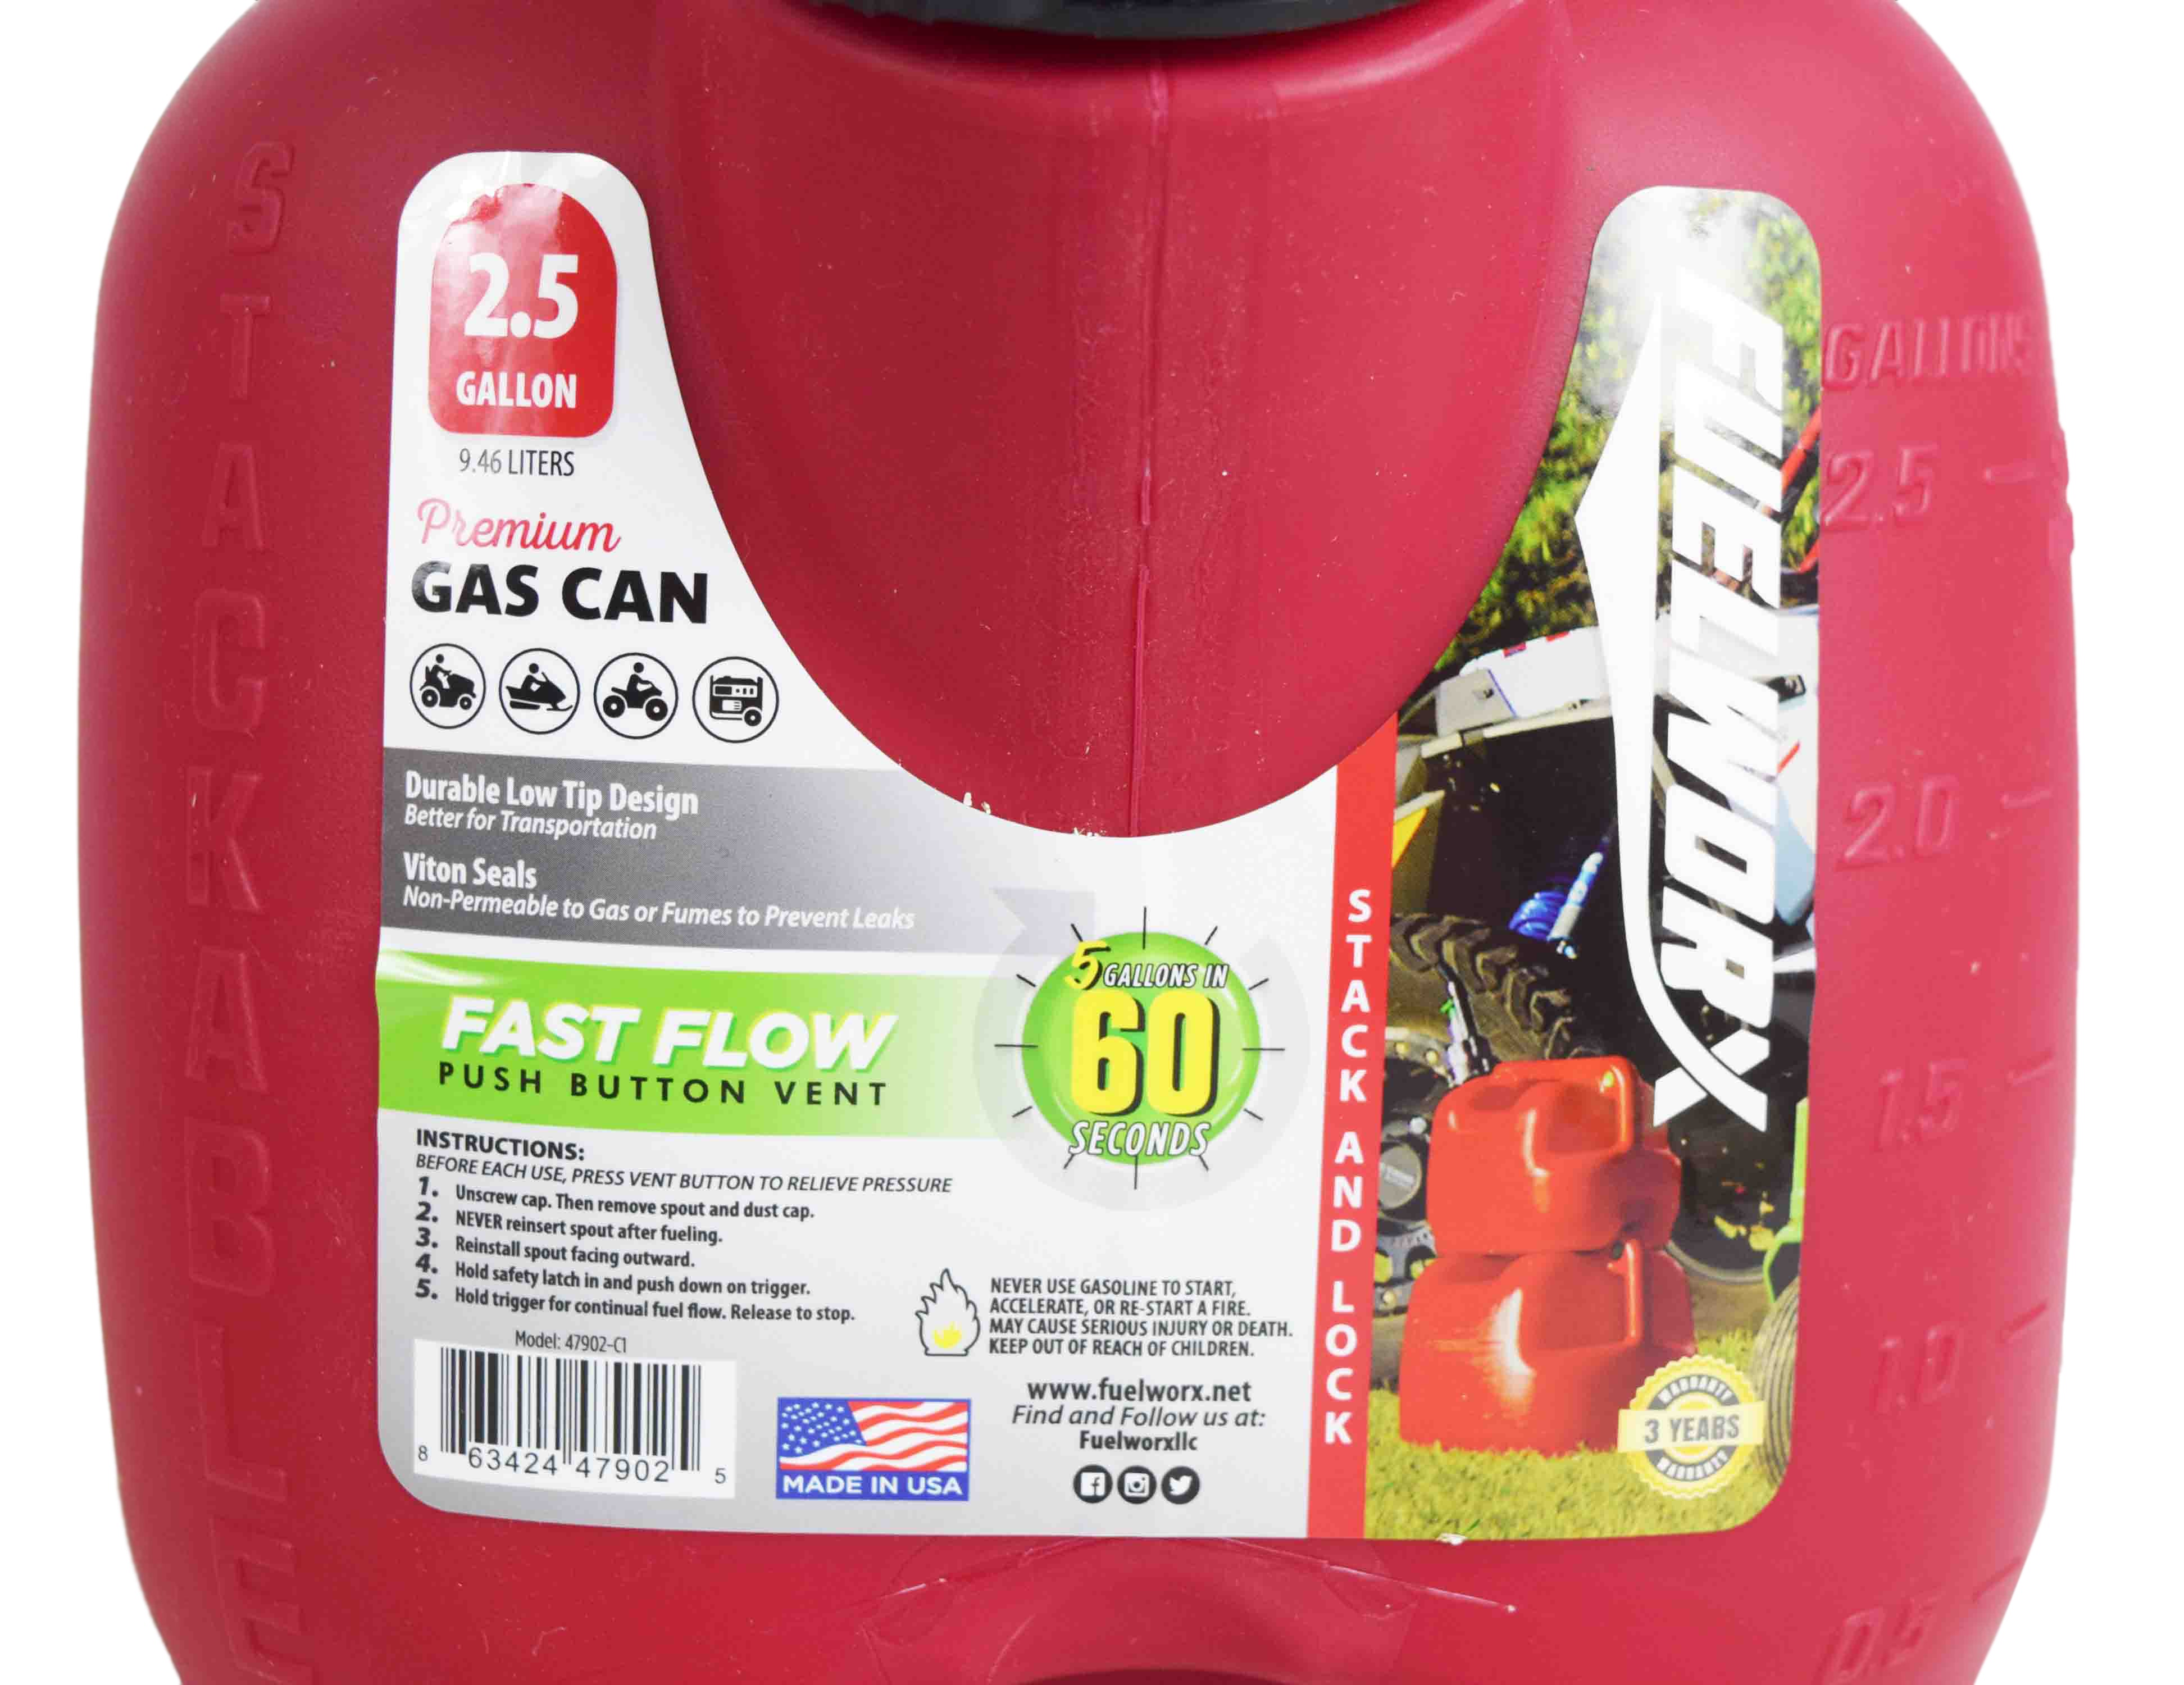 Fuelworx-Red-2.5-Gallon-Stackable-Fast-Pour-Gas-Fuel-Cans-CARB-Compliant-Made-in-The-USA-2.5-Gallon-Gas-Single-Can-image-8